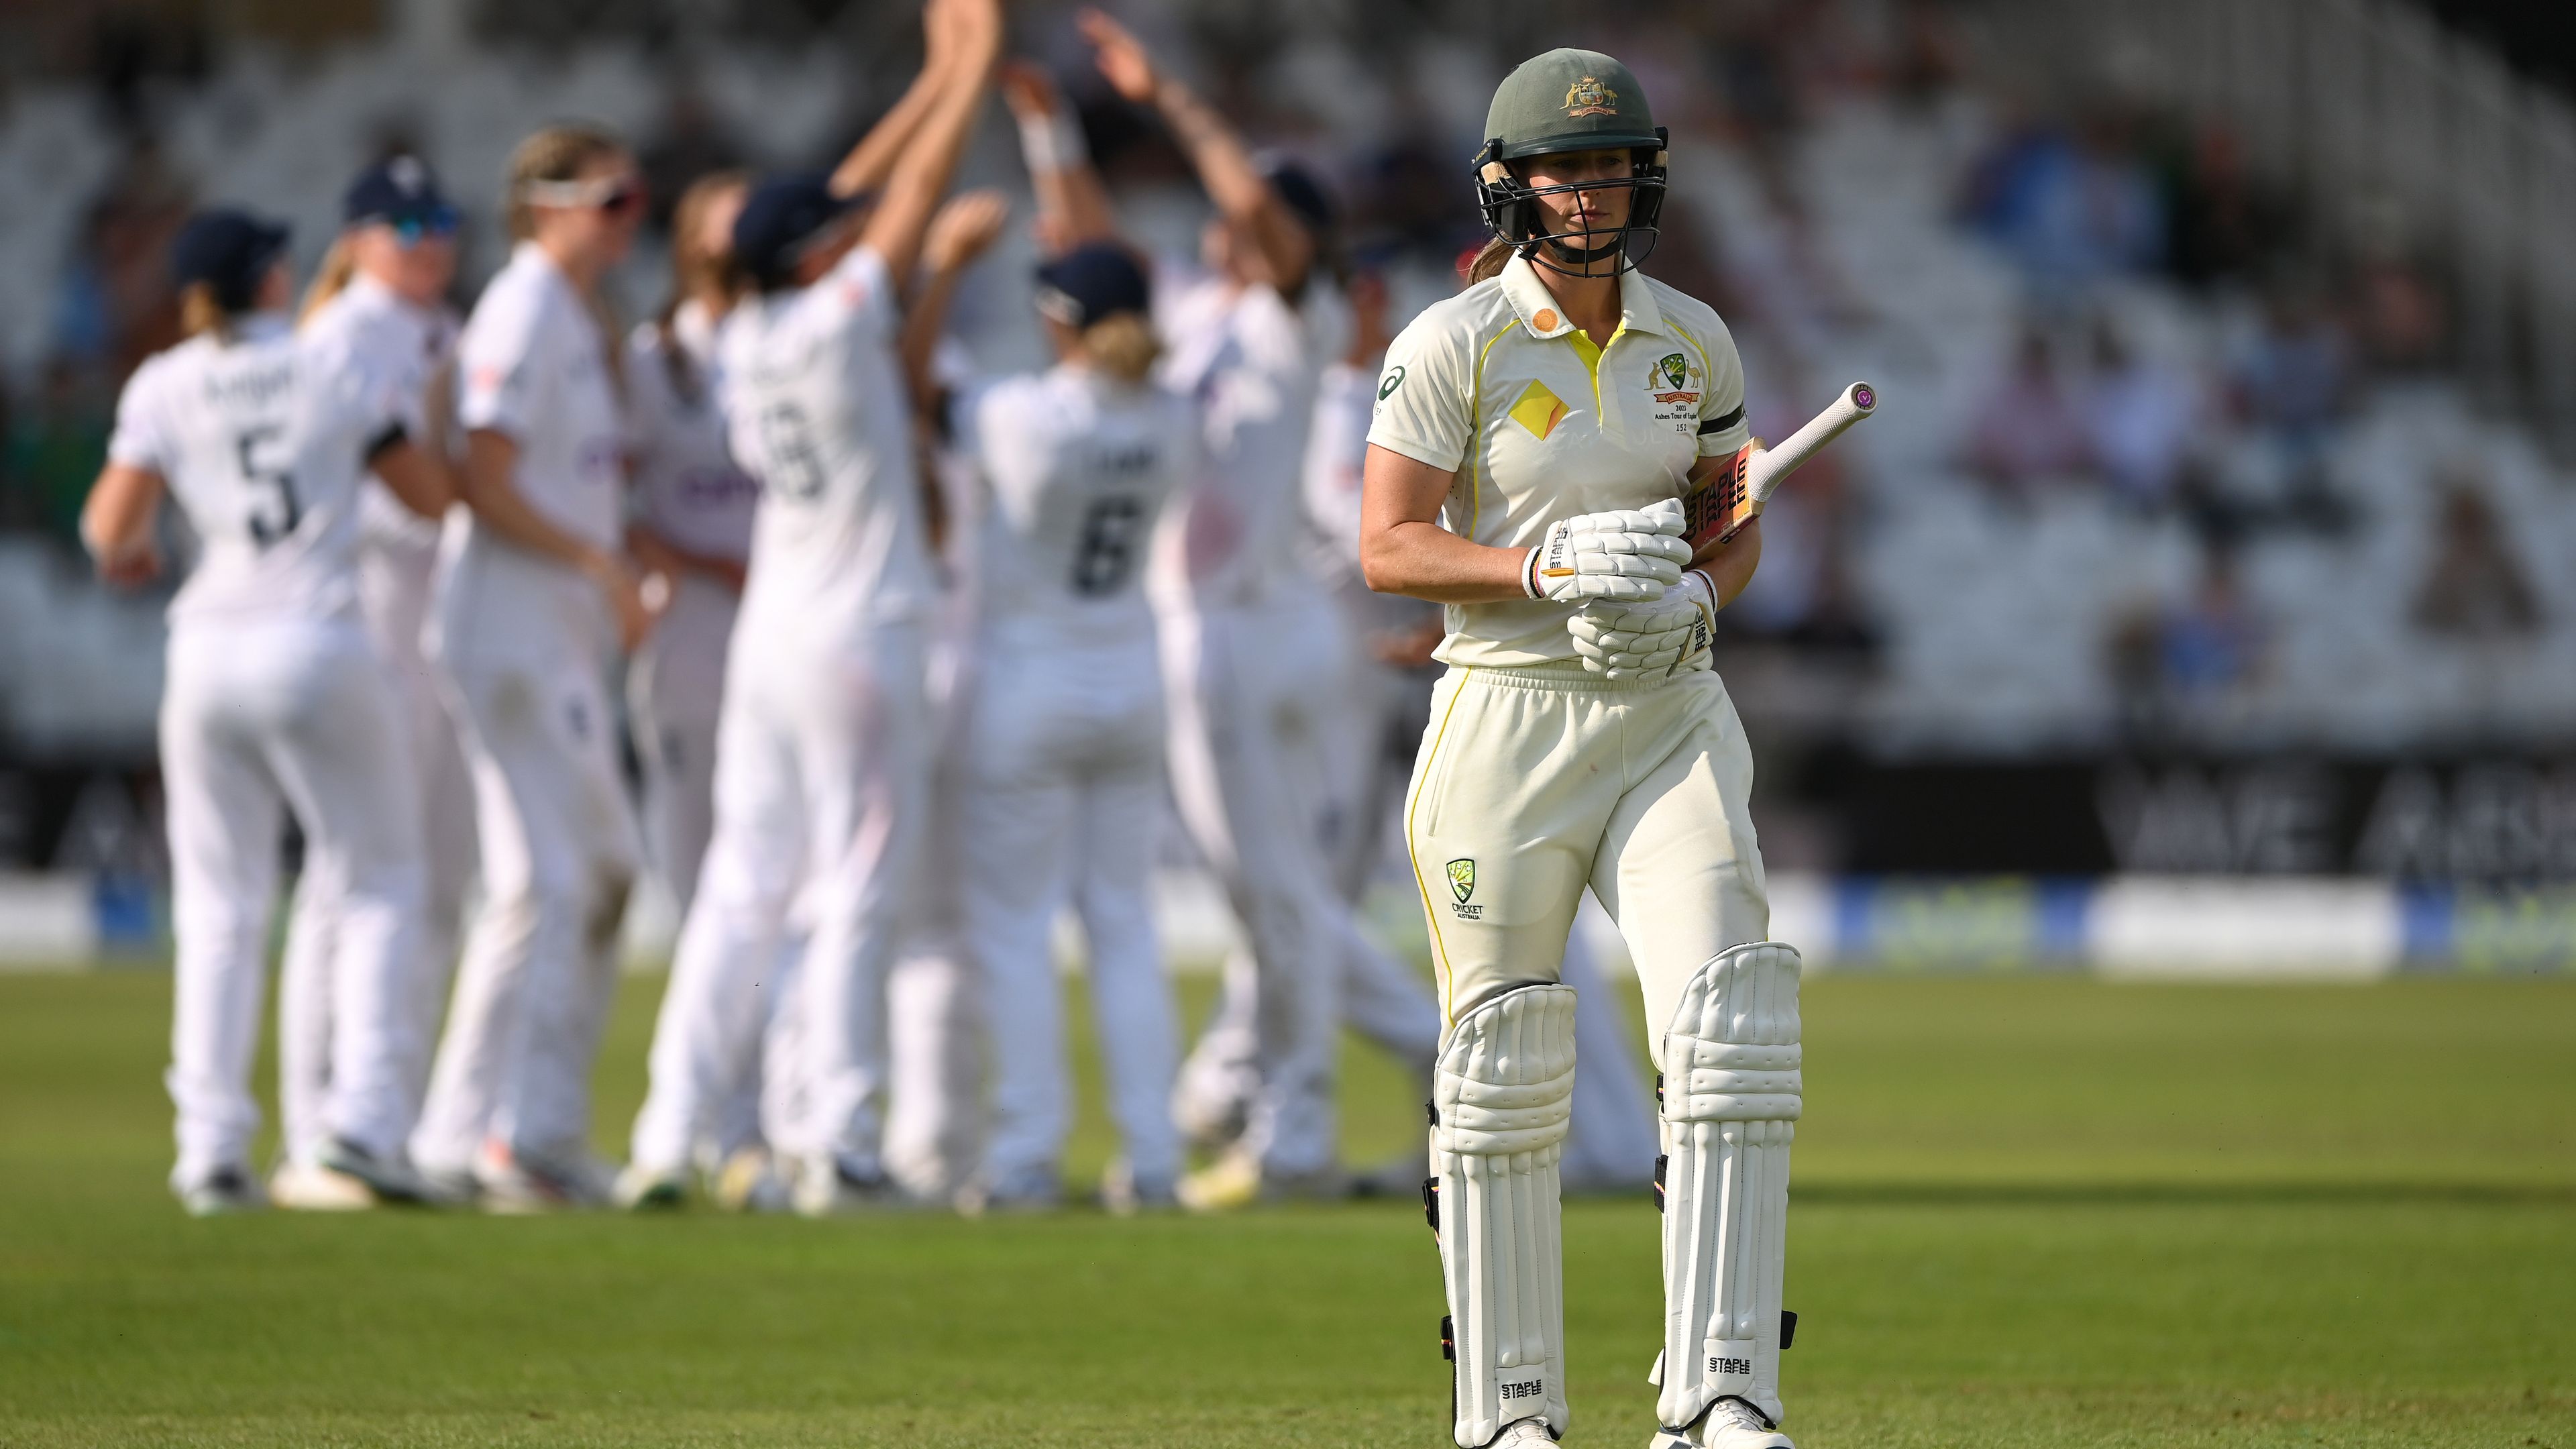 Australia batter Ellyse Perry reacts after being dismissed for 99 in the Ashes.